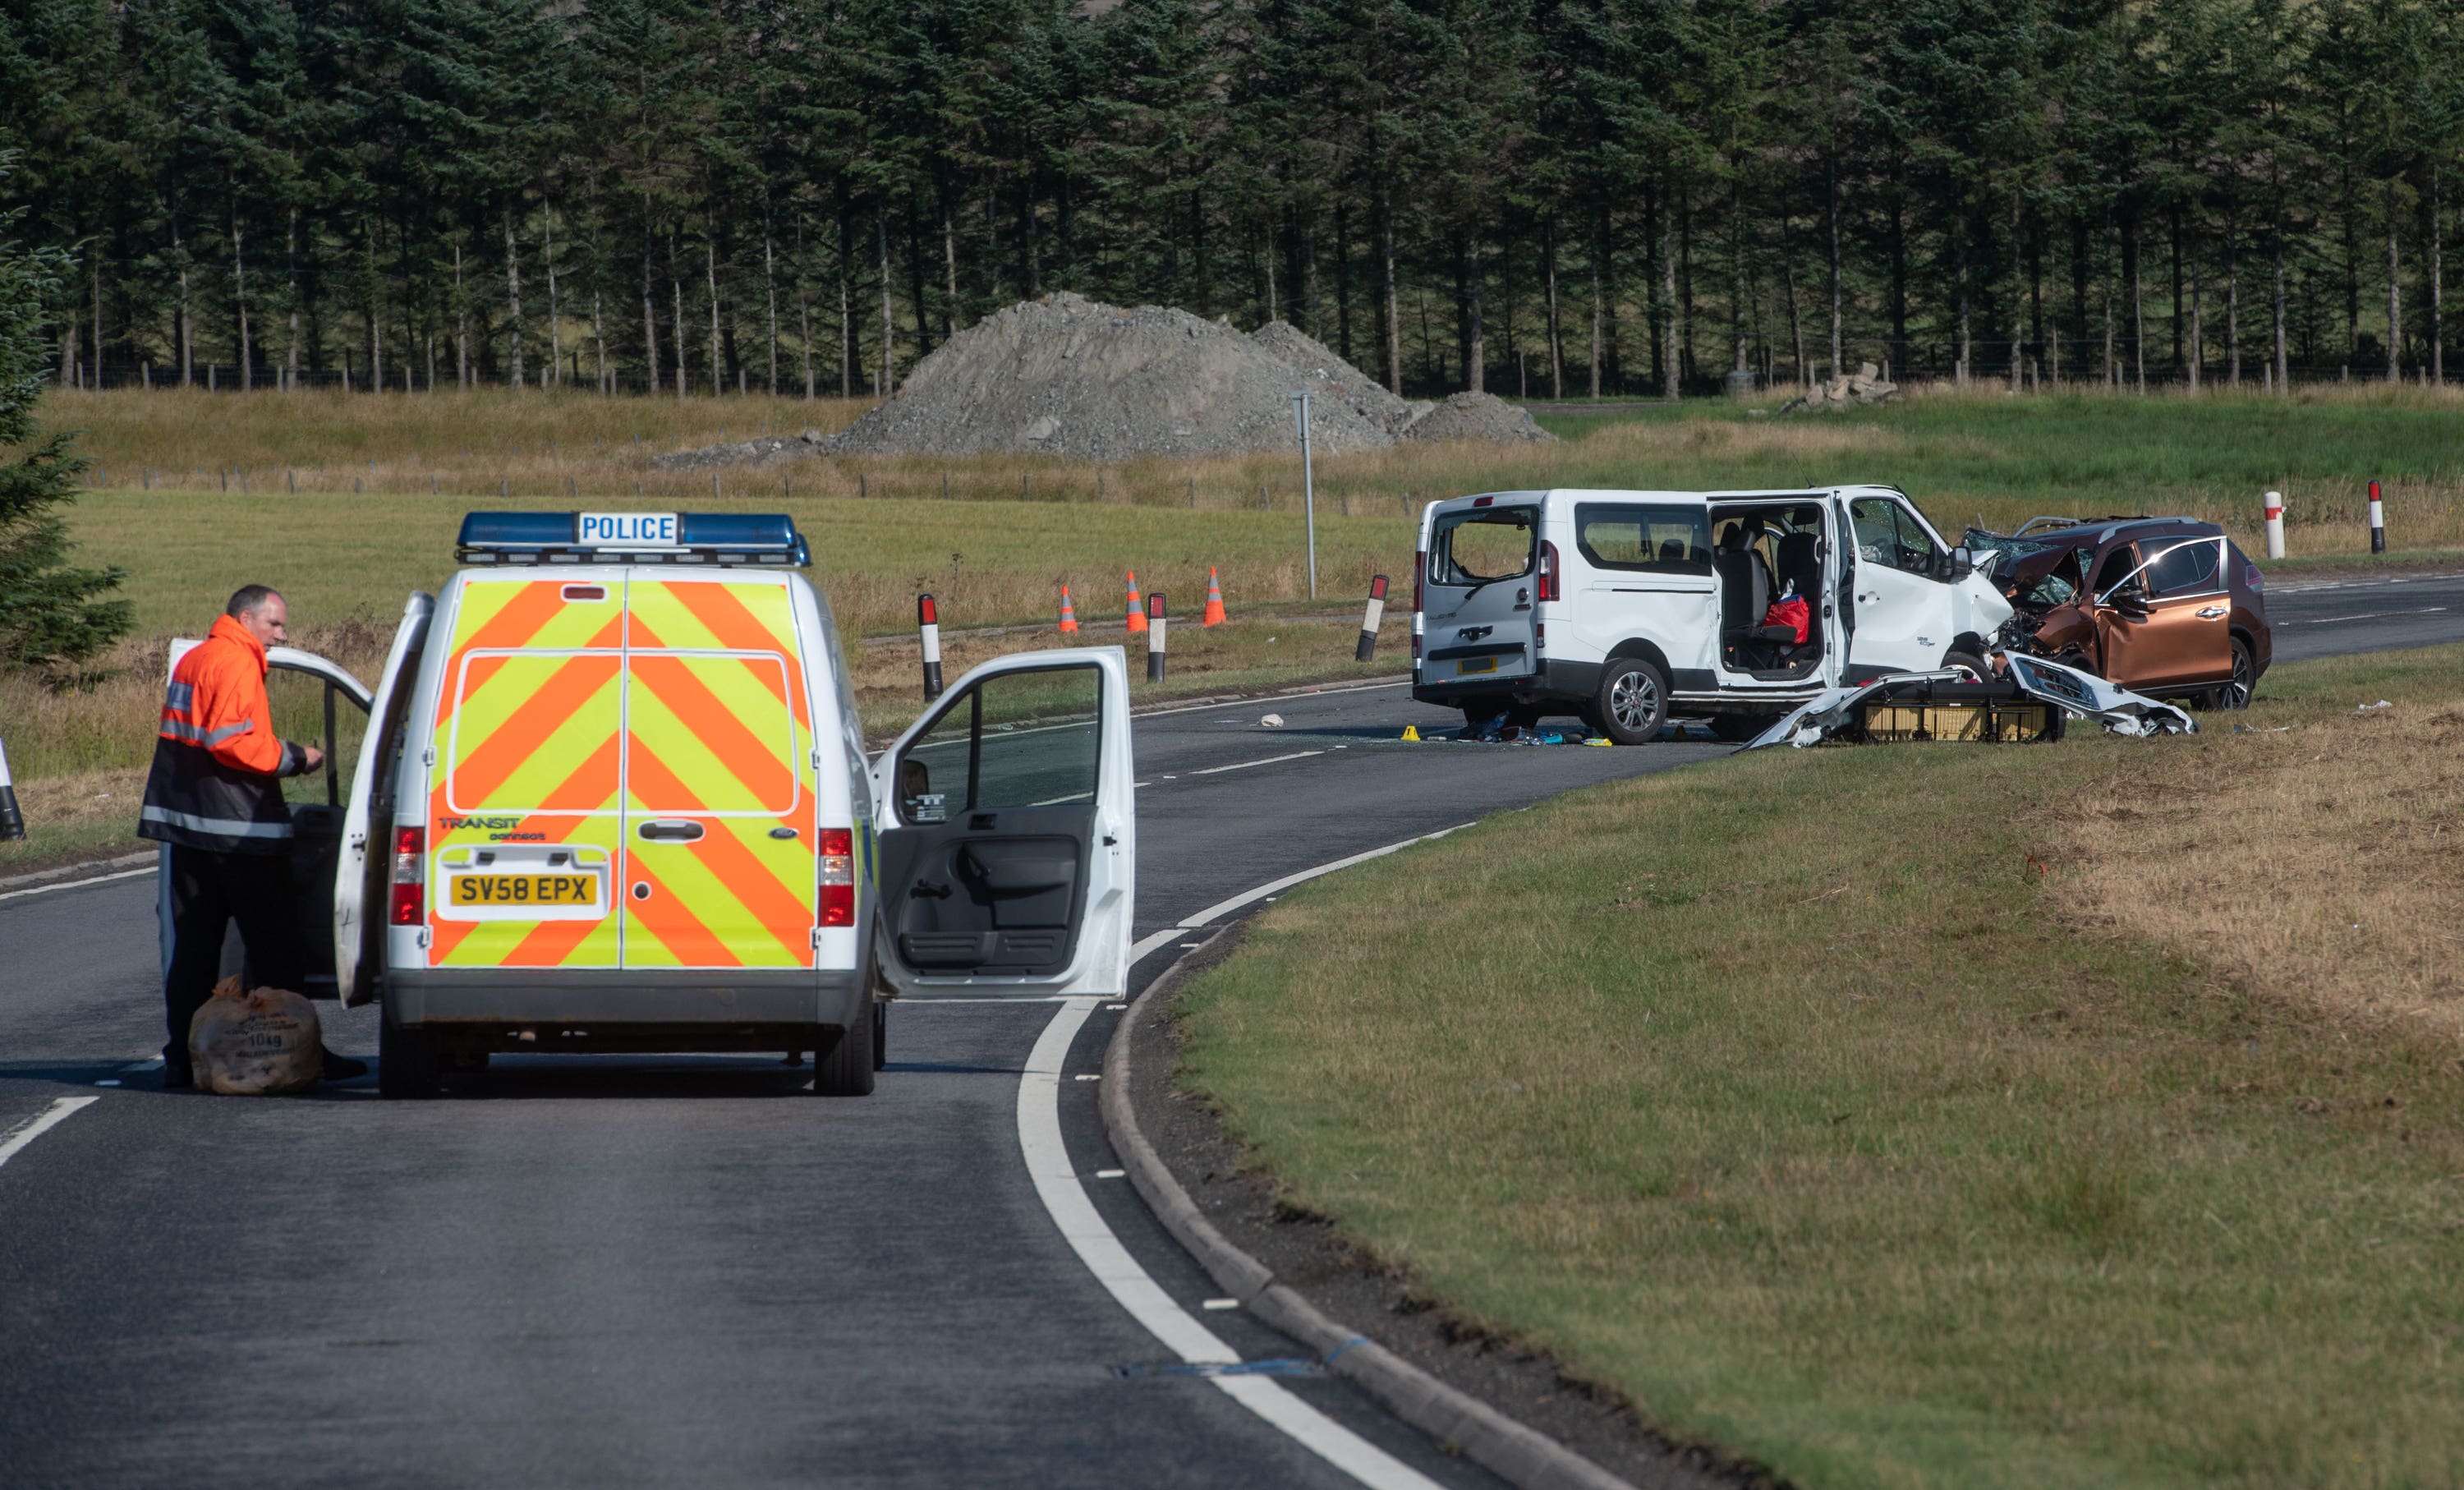 Liam Kerr raised concerns about safety on the A96.